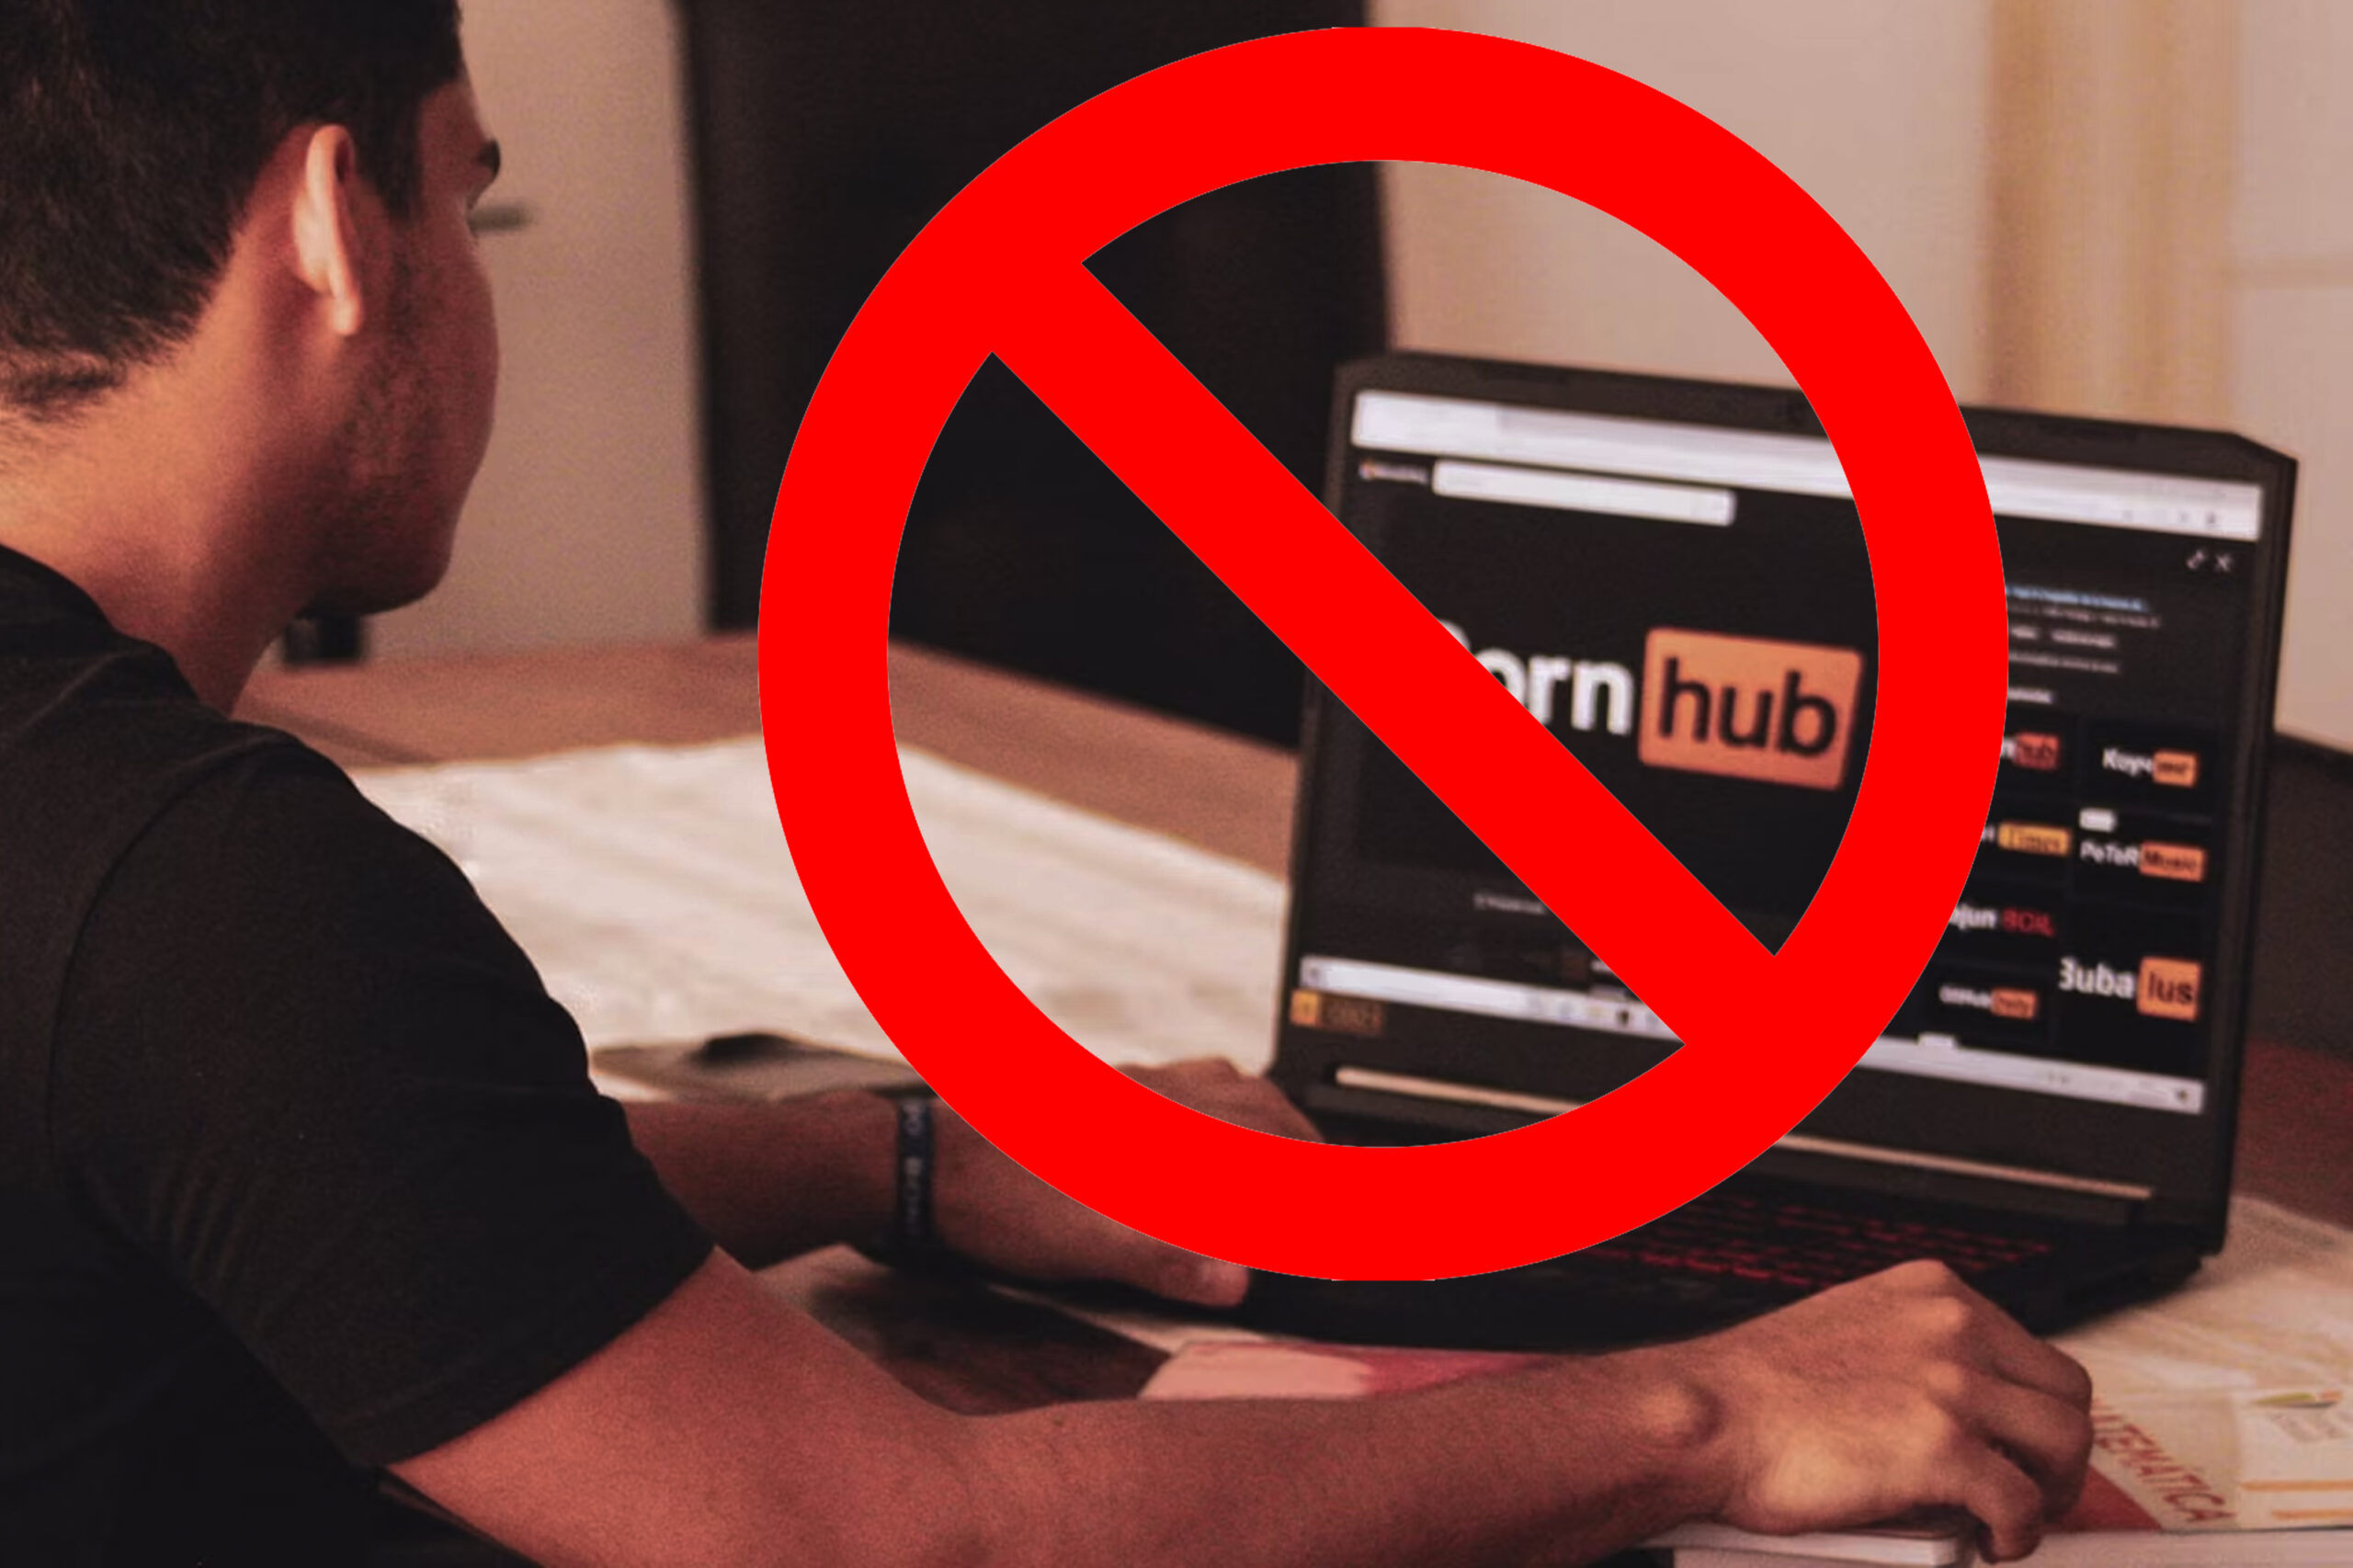 Poruhnb - Pornhub Blocks Access In Utah Because of State's New Age Verification Law -  RELEVANT